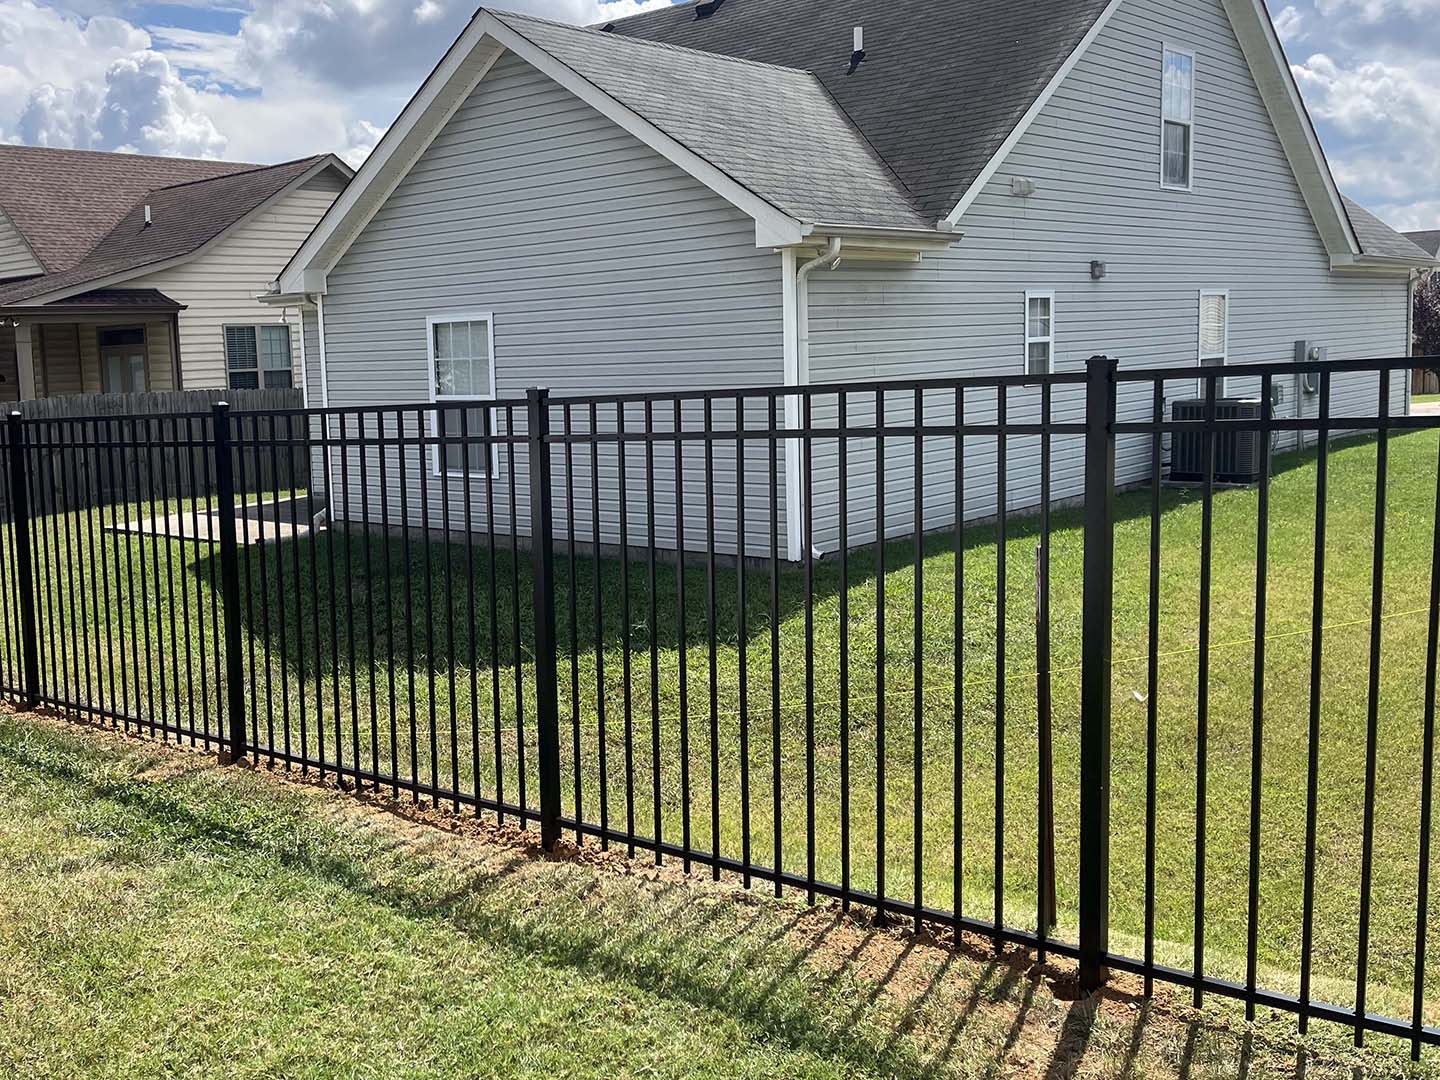 Photo of a Middle Tennessee aluminum fence